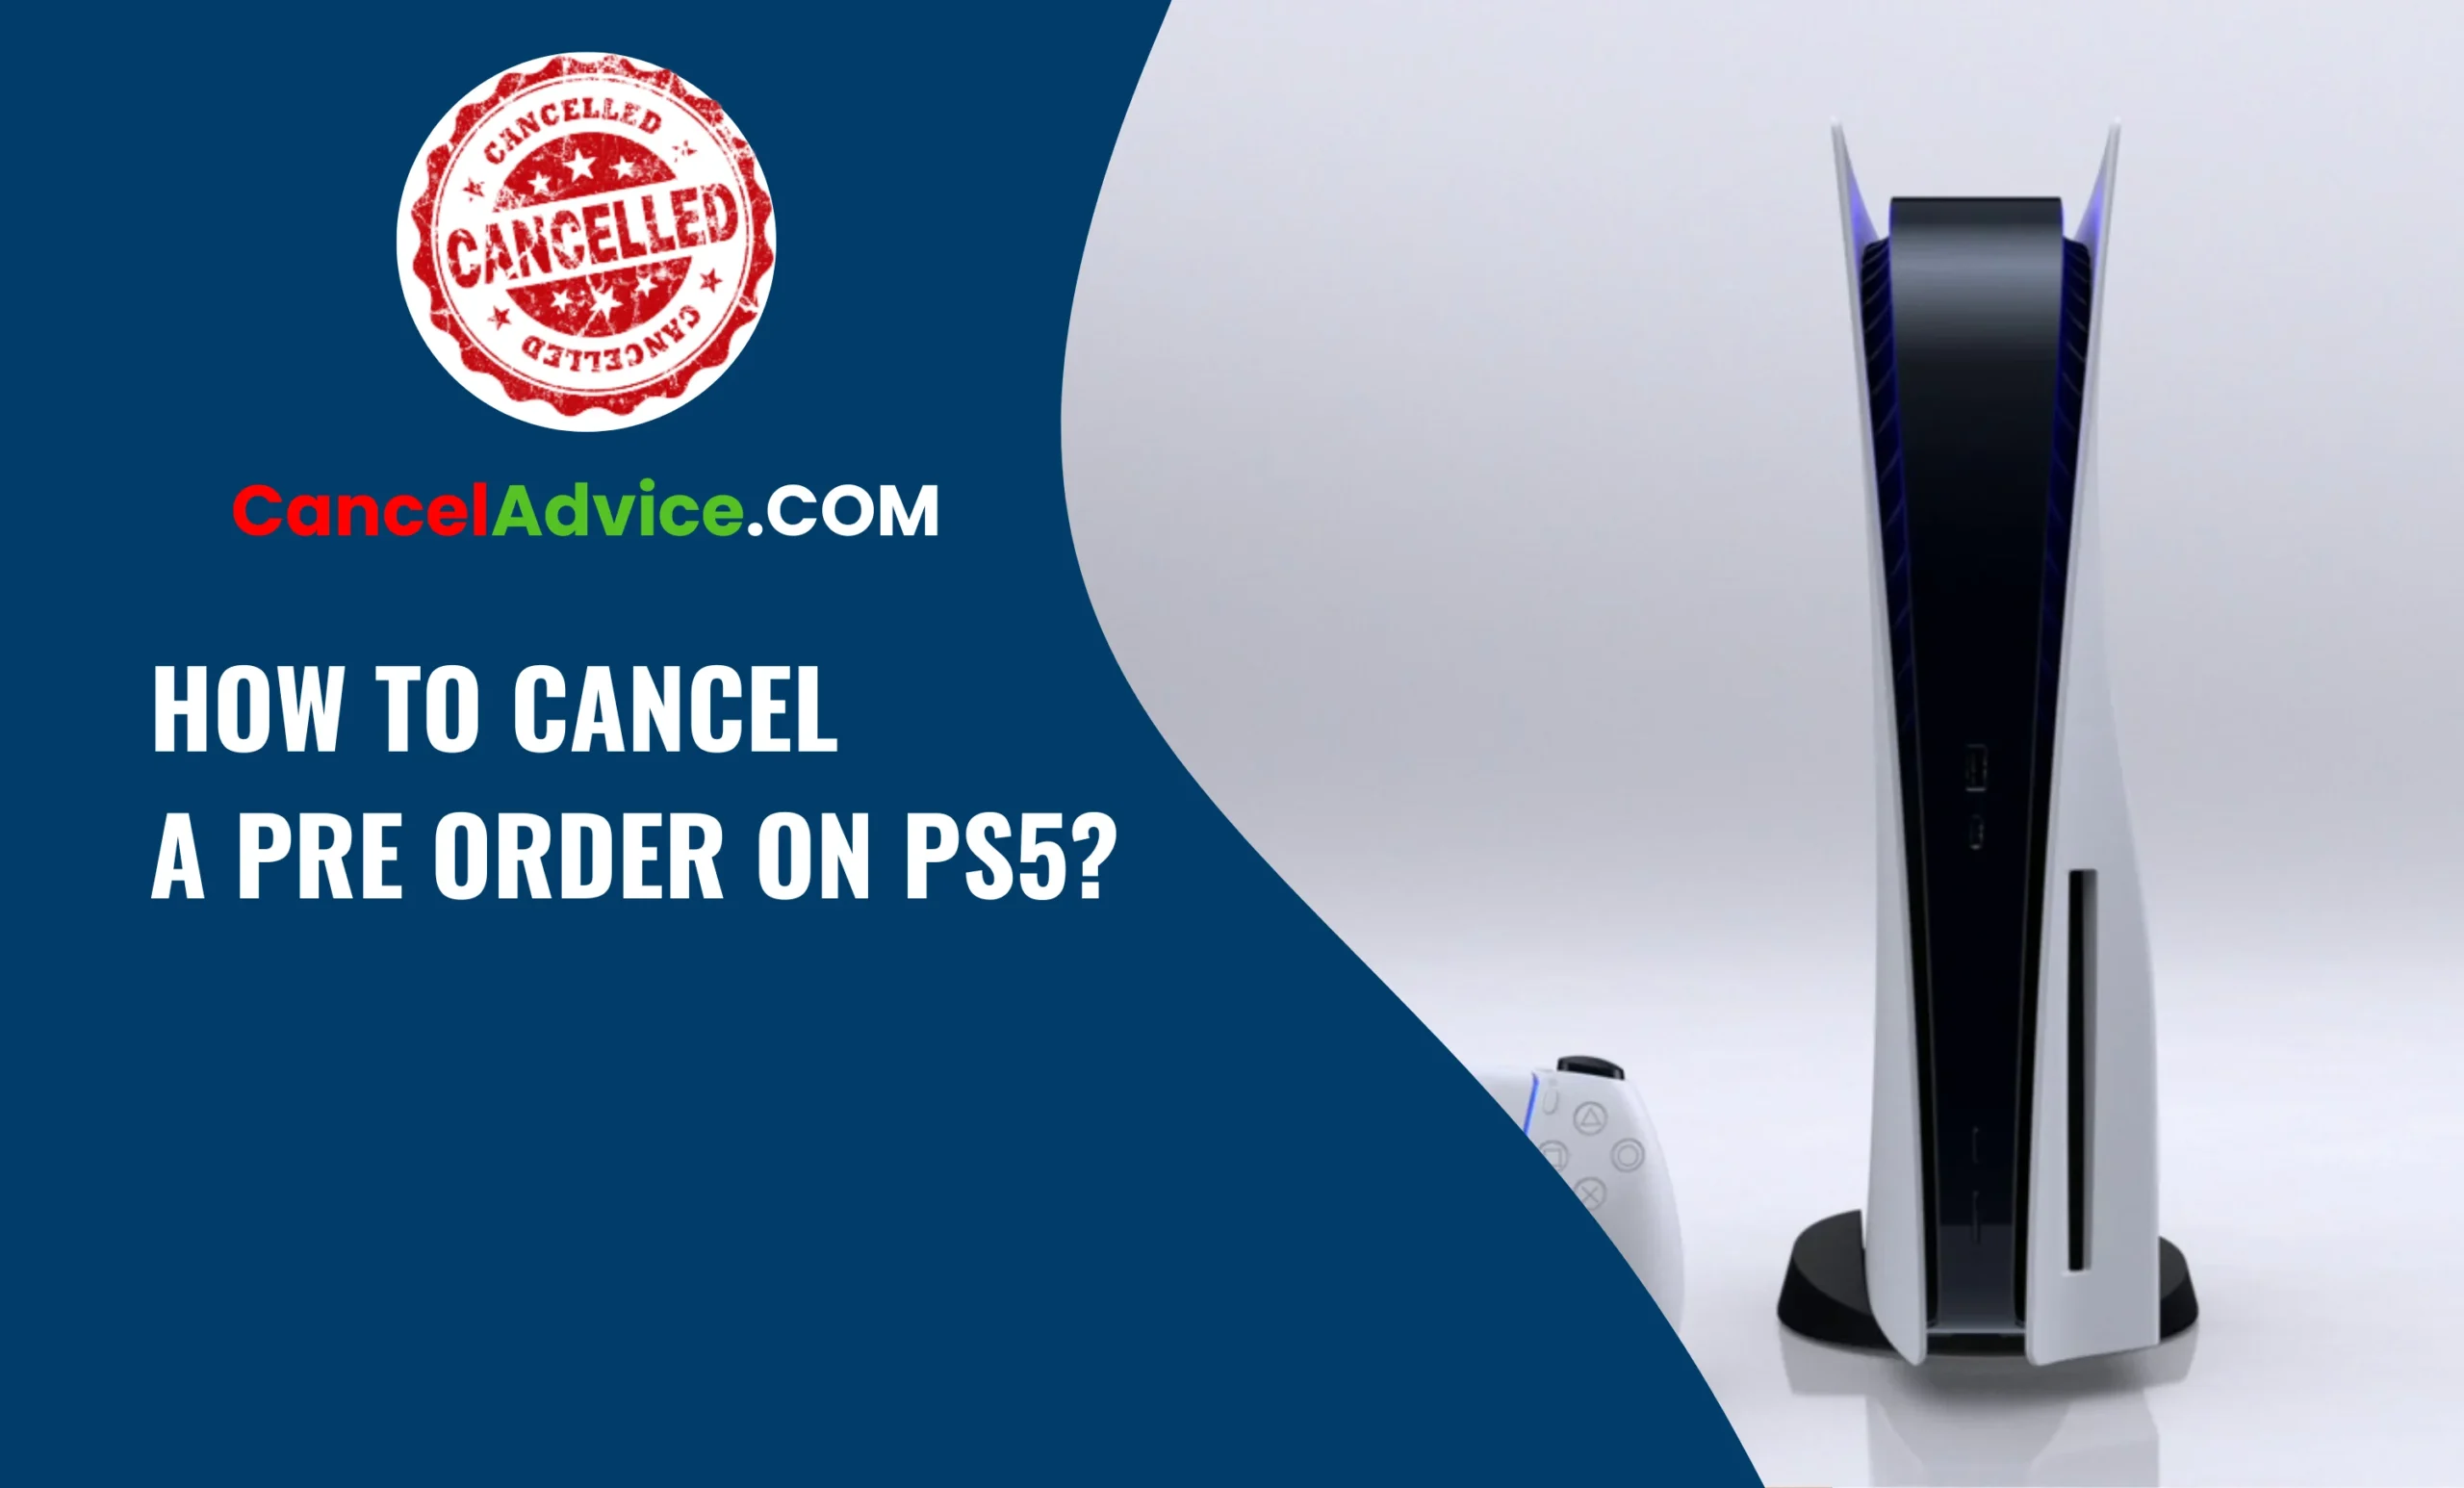 How To Cancel A Pre Order On PS5